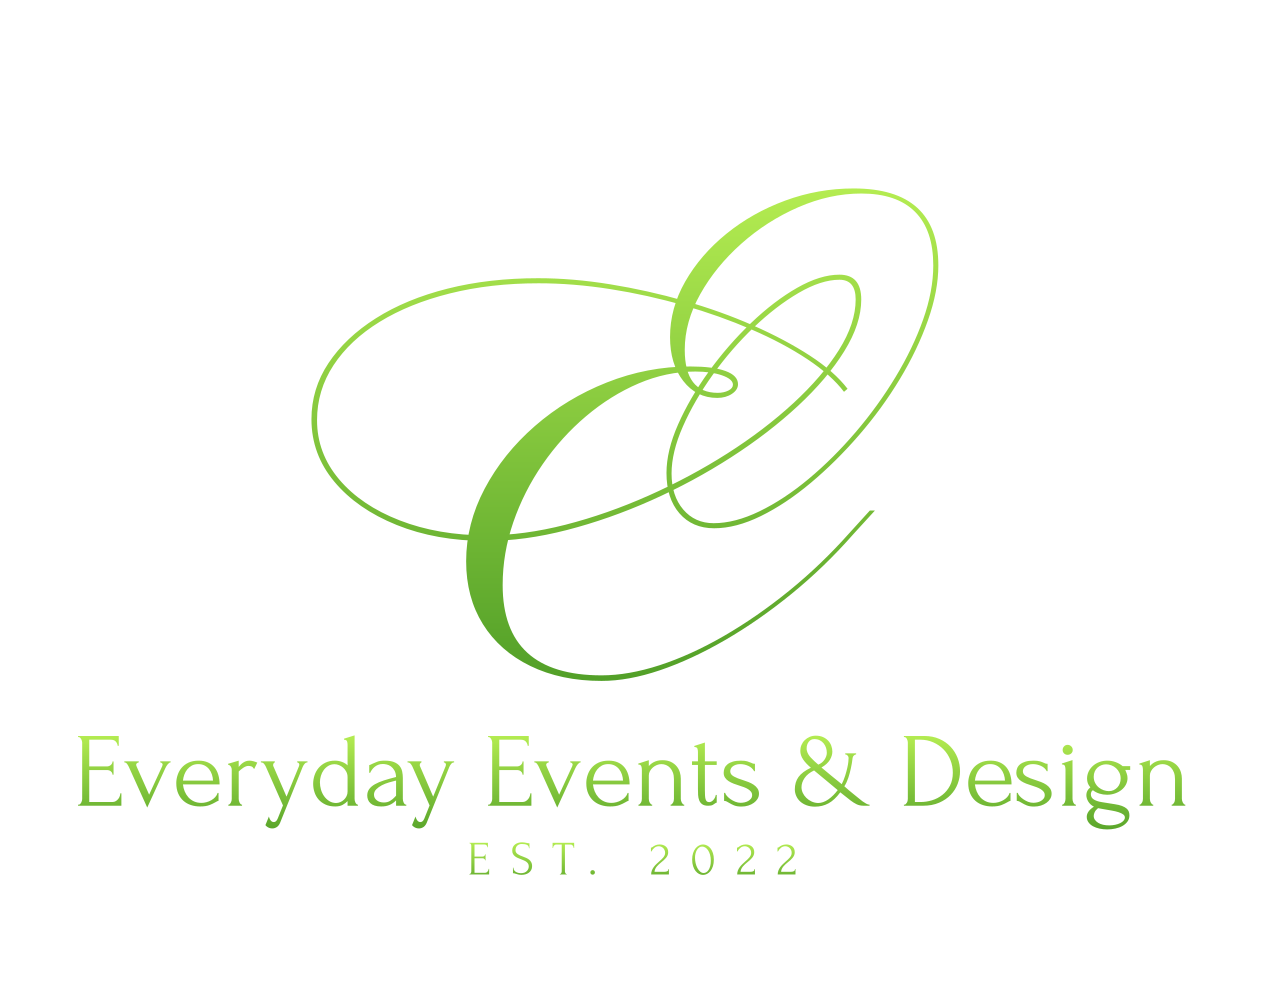 The logo or business face of "Everyday Events & Design LLC"